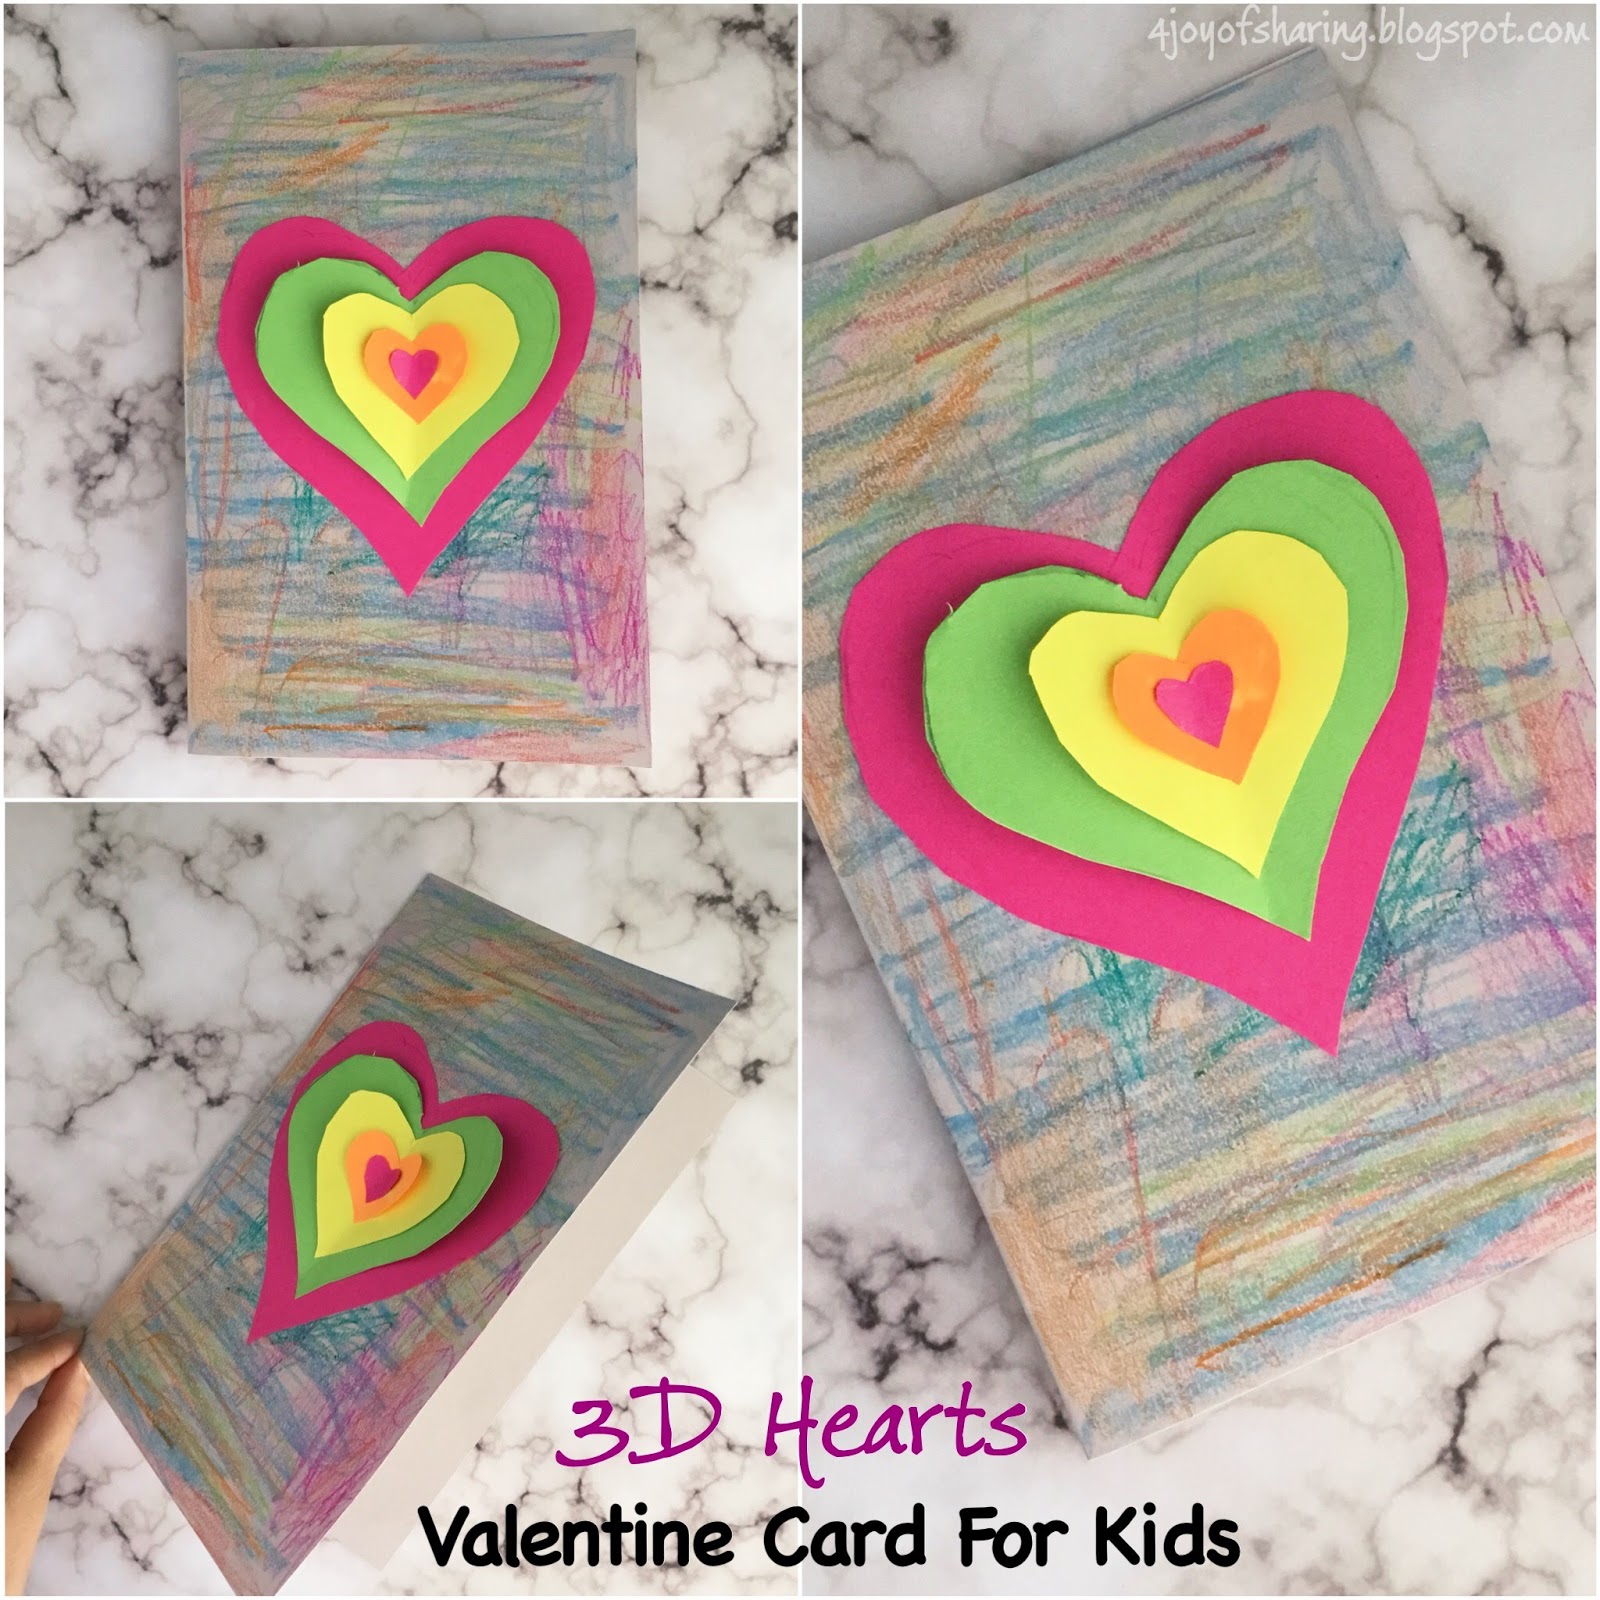 Valentines Day Craft, Valentines Craft, Card Ideas, Simple craft idea, 10 mins craft idea, Kids craft, crafts for kids, craft ideas, kids crafts, craft ideas for kids, paper craft, art projects for kids, easy crafts for kids, fun craft for kids, kids arts and crafts, art activities for kids, kids projects, art and crafts ideas, toddler crafts, toddler fun, preschool craft ideas, kindergarten crafts, crafts for young kids, school crafts,